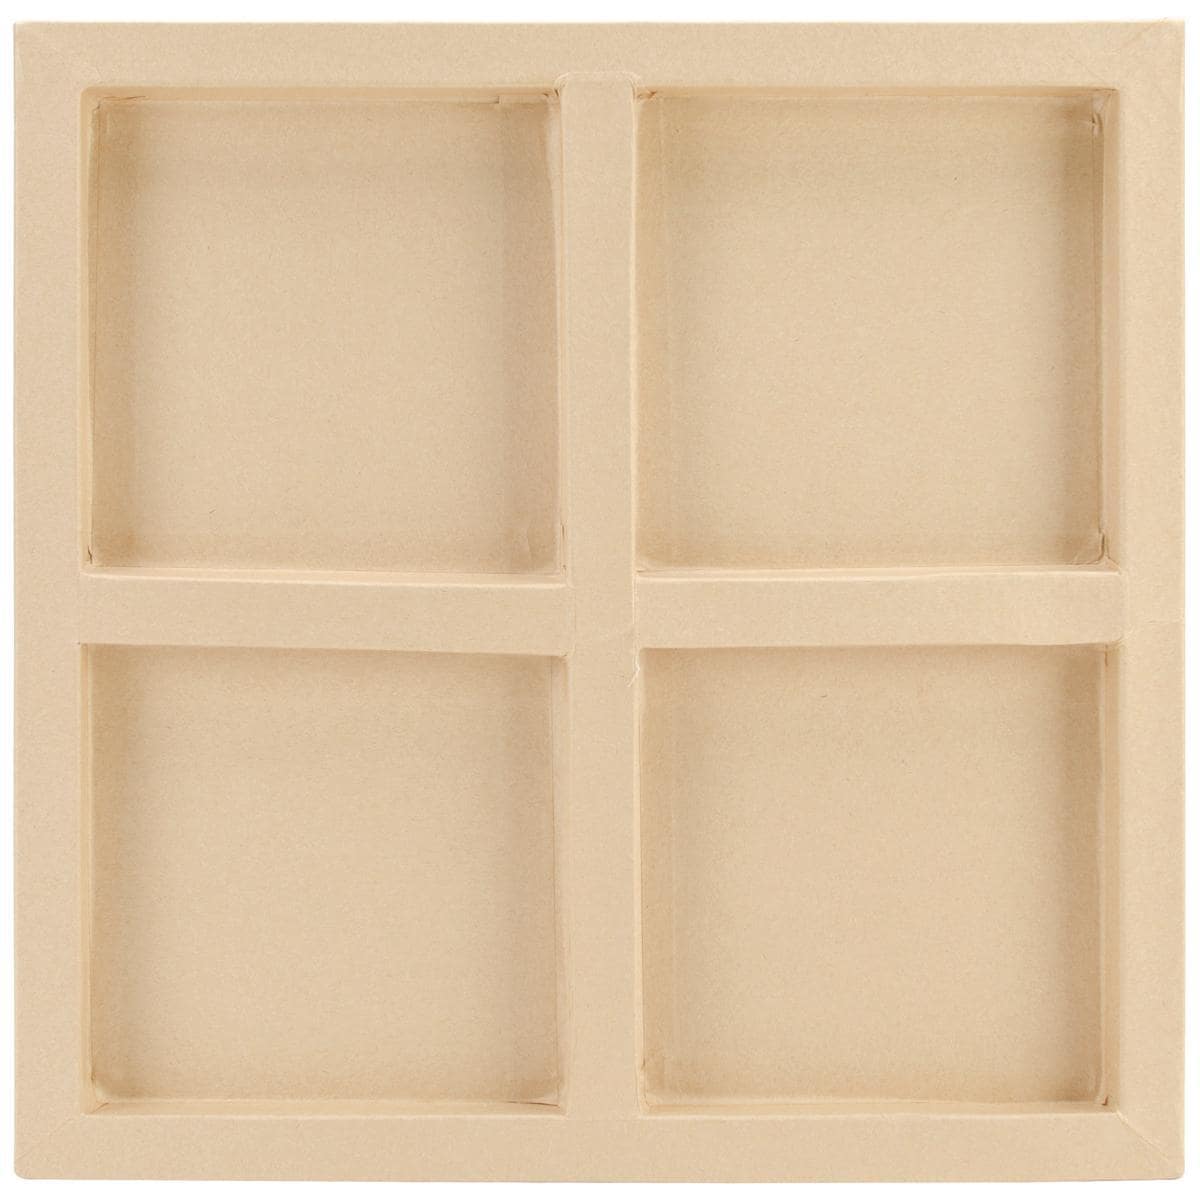 Off The Page Boxes  Frame W/4 Divisions  12.5 X12.5 (5.25 X5.25 Division)